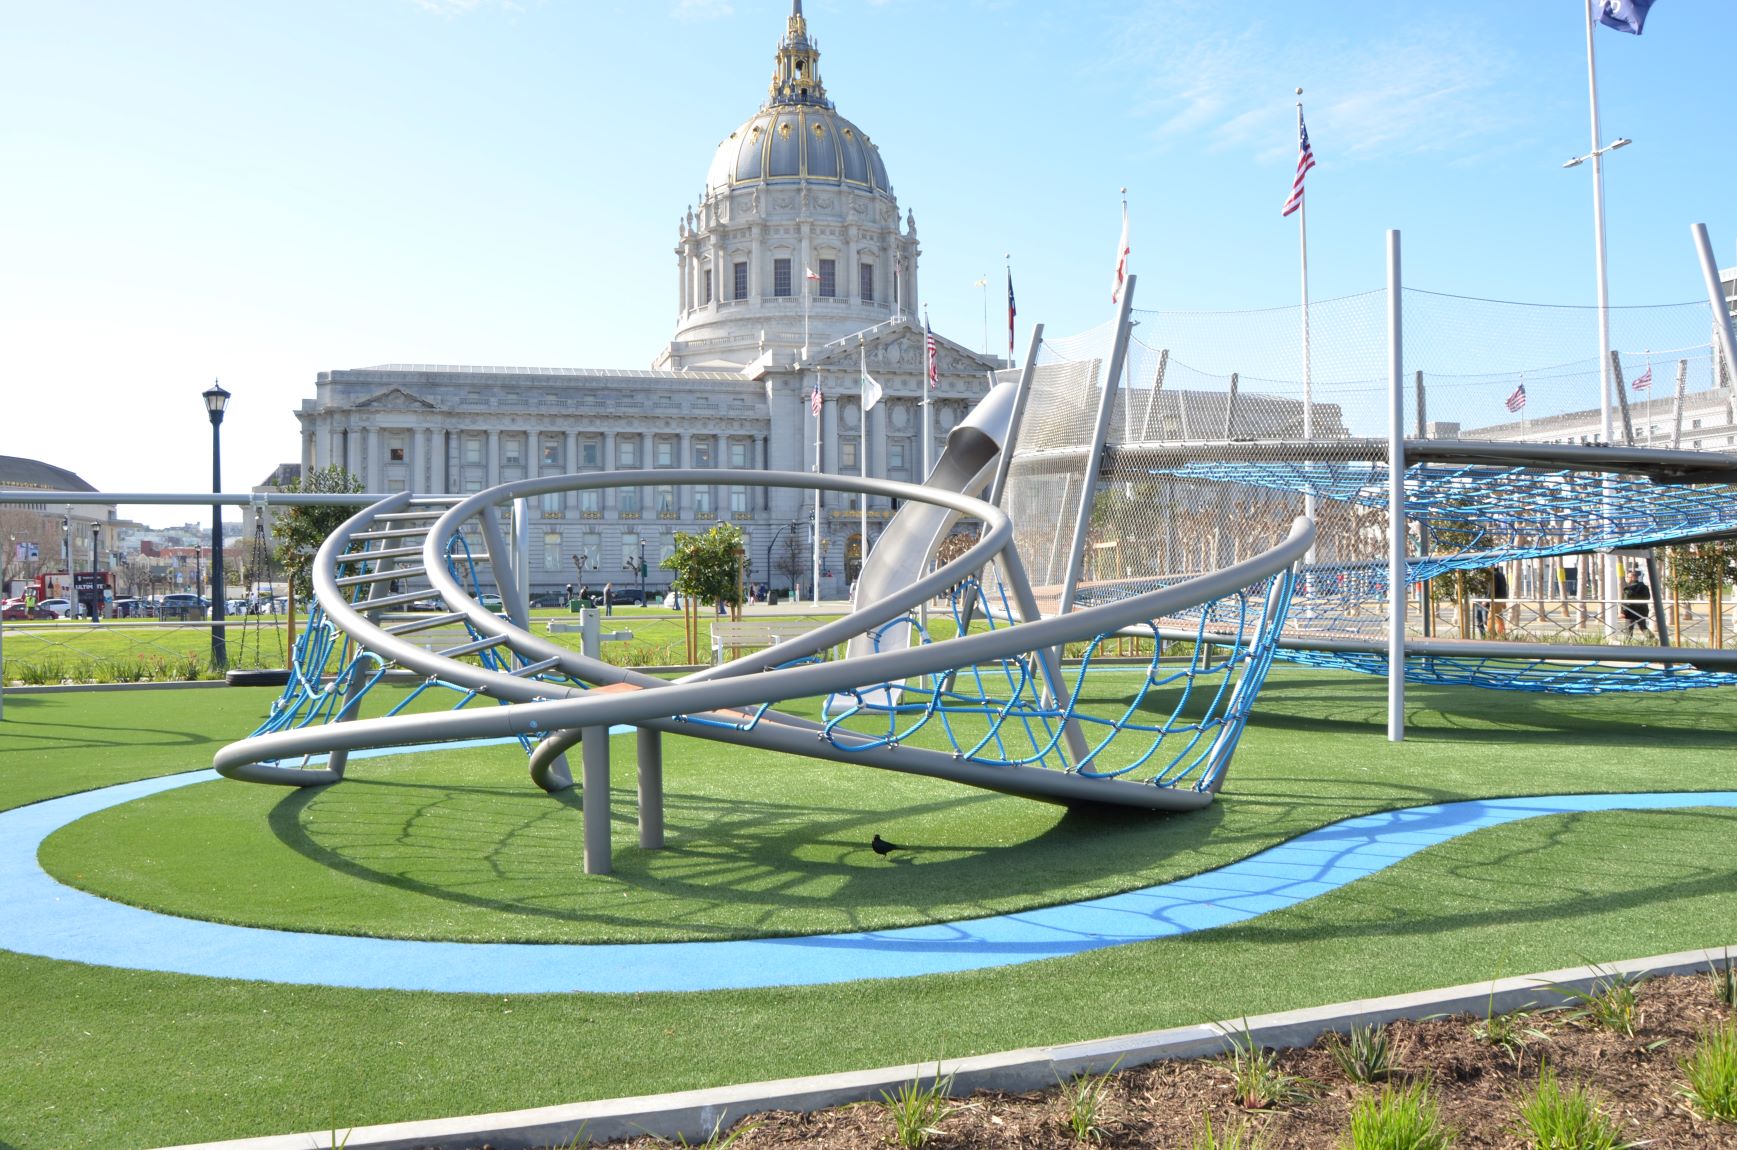 Award Wining Helen Diller Playground rises in front of San Franciso City Hall